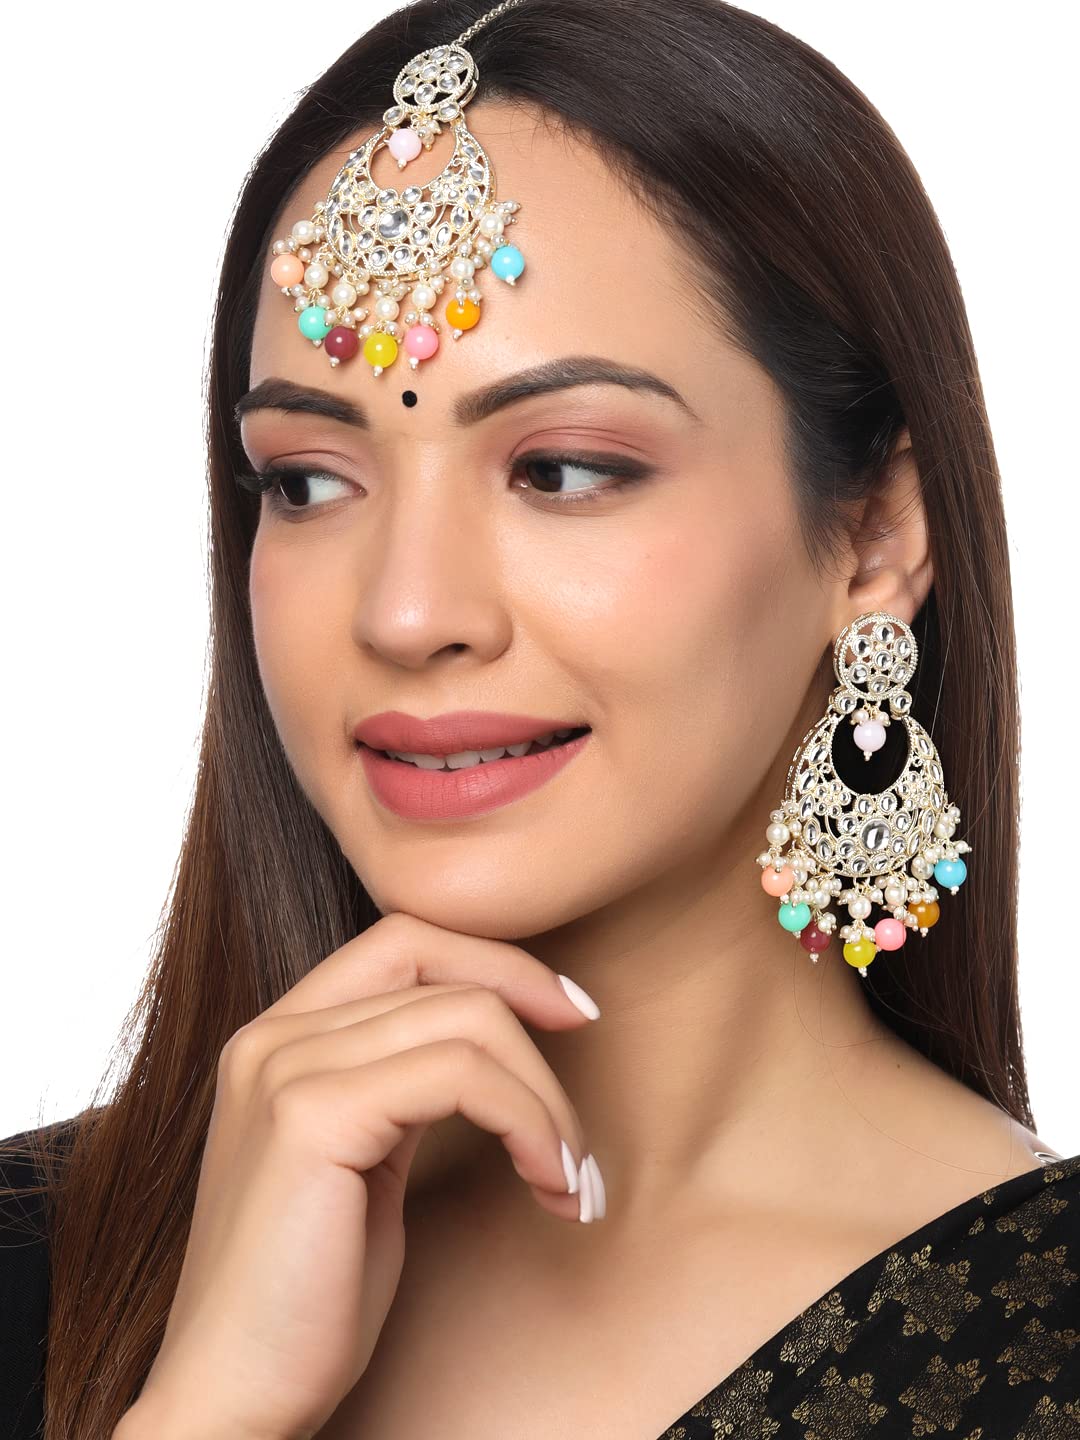 Yellow Chimes Earrings for Women Gold Toned Kundan Studded Multicolor Beads Drop Chandbali Designed Earrings and Maang Tikka Set for Women and Girls